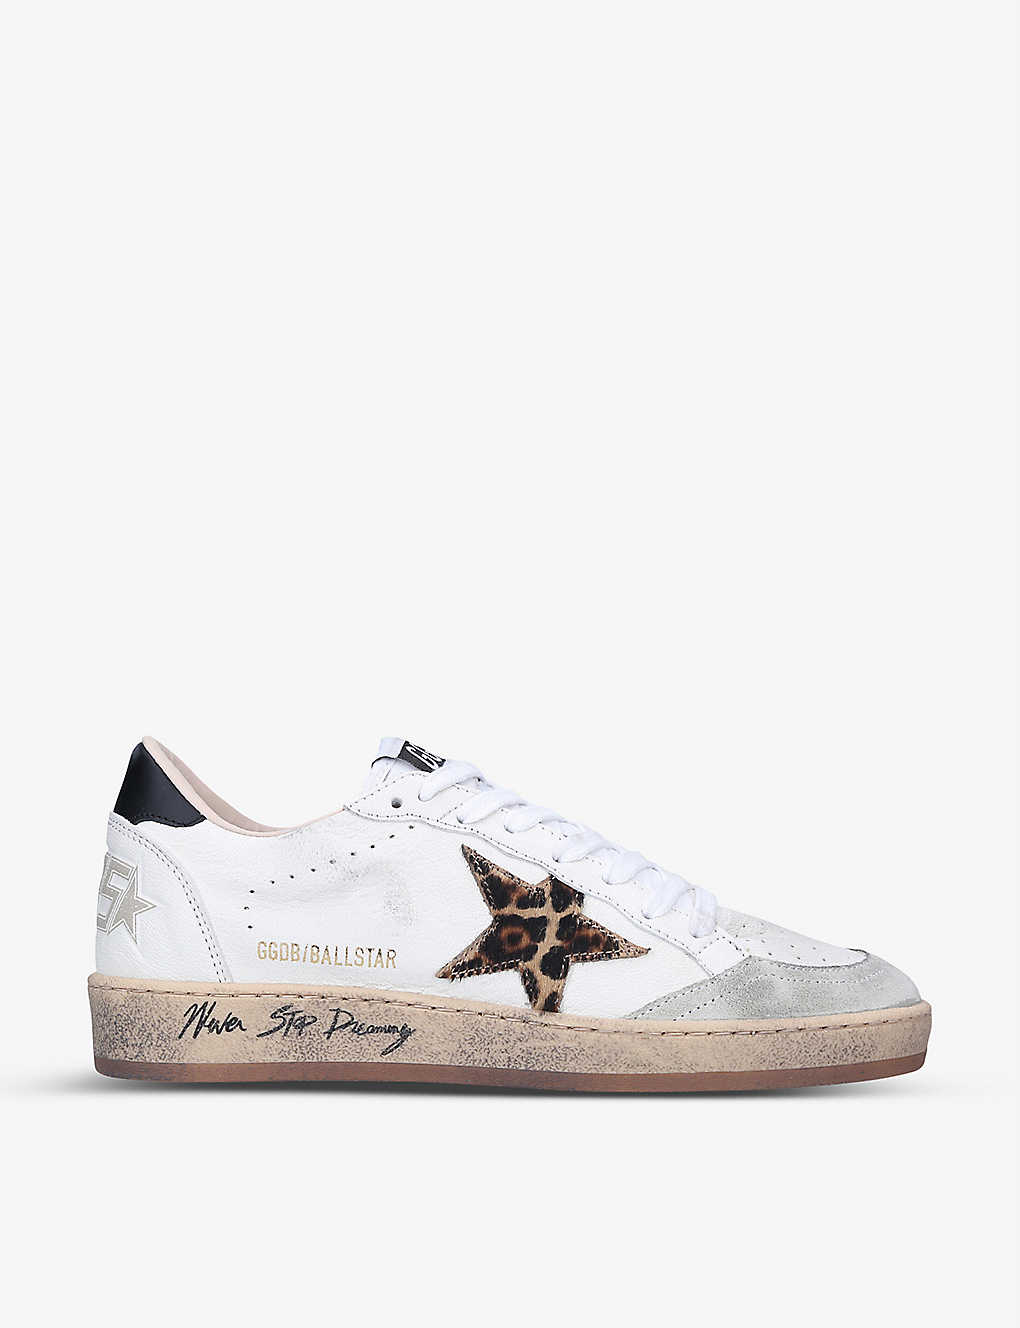 Golden Goose Ball Star 10920 Low-top Leather Trainers In White